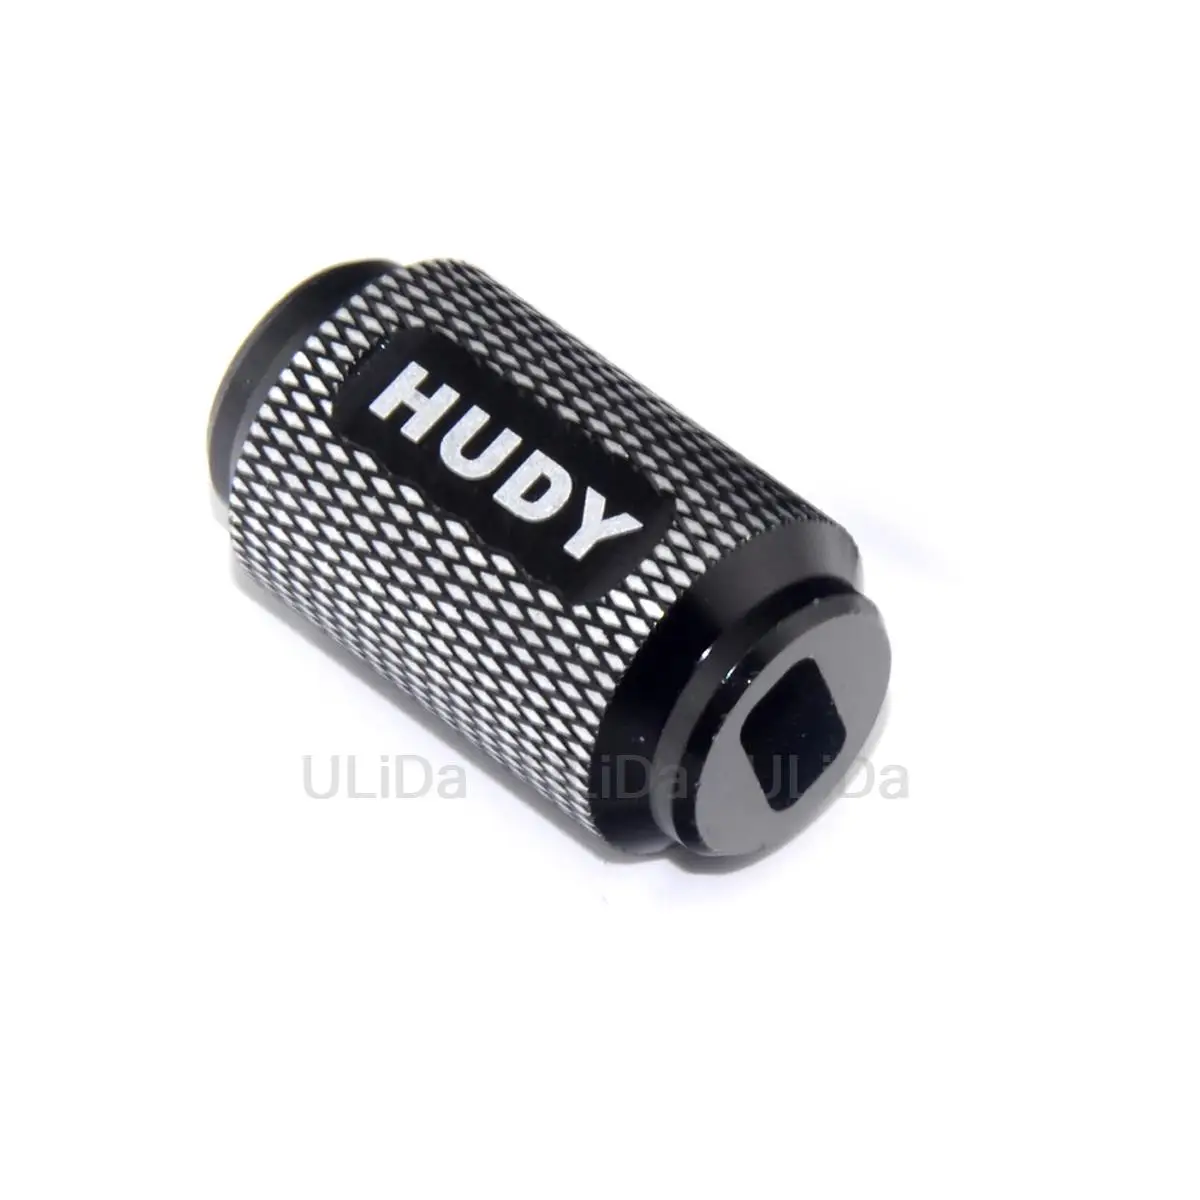 Hudy #181110 Ball Joint Wrench Tools RC Aluminum Ball End Assembly Remover 4 5mm for RC Helicopter Car Boat Aircraft Drone